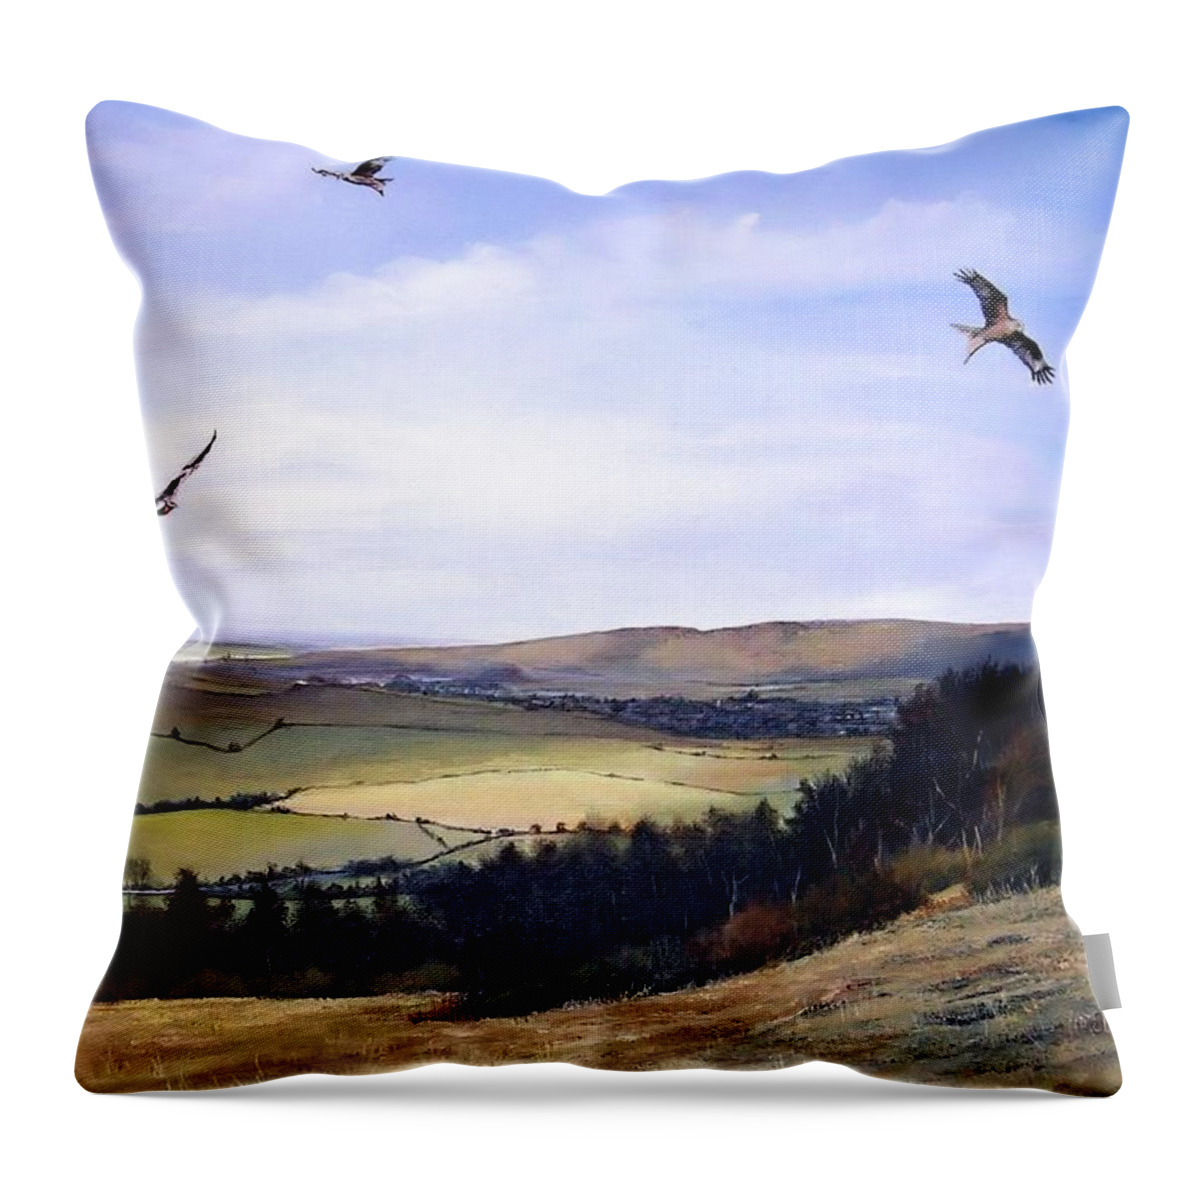  Red Kites Throw Pillow featuring the painting Red Kites at Coombe Hill by Barry BLAKE